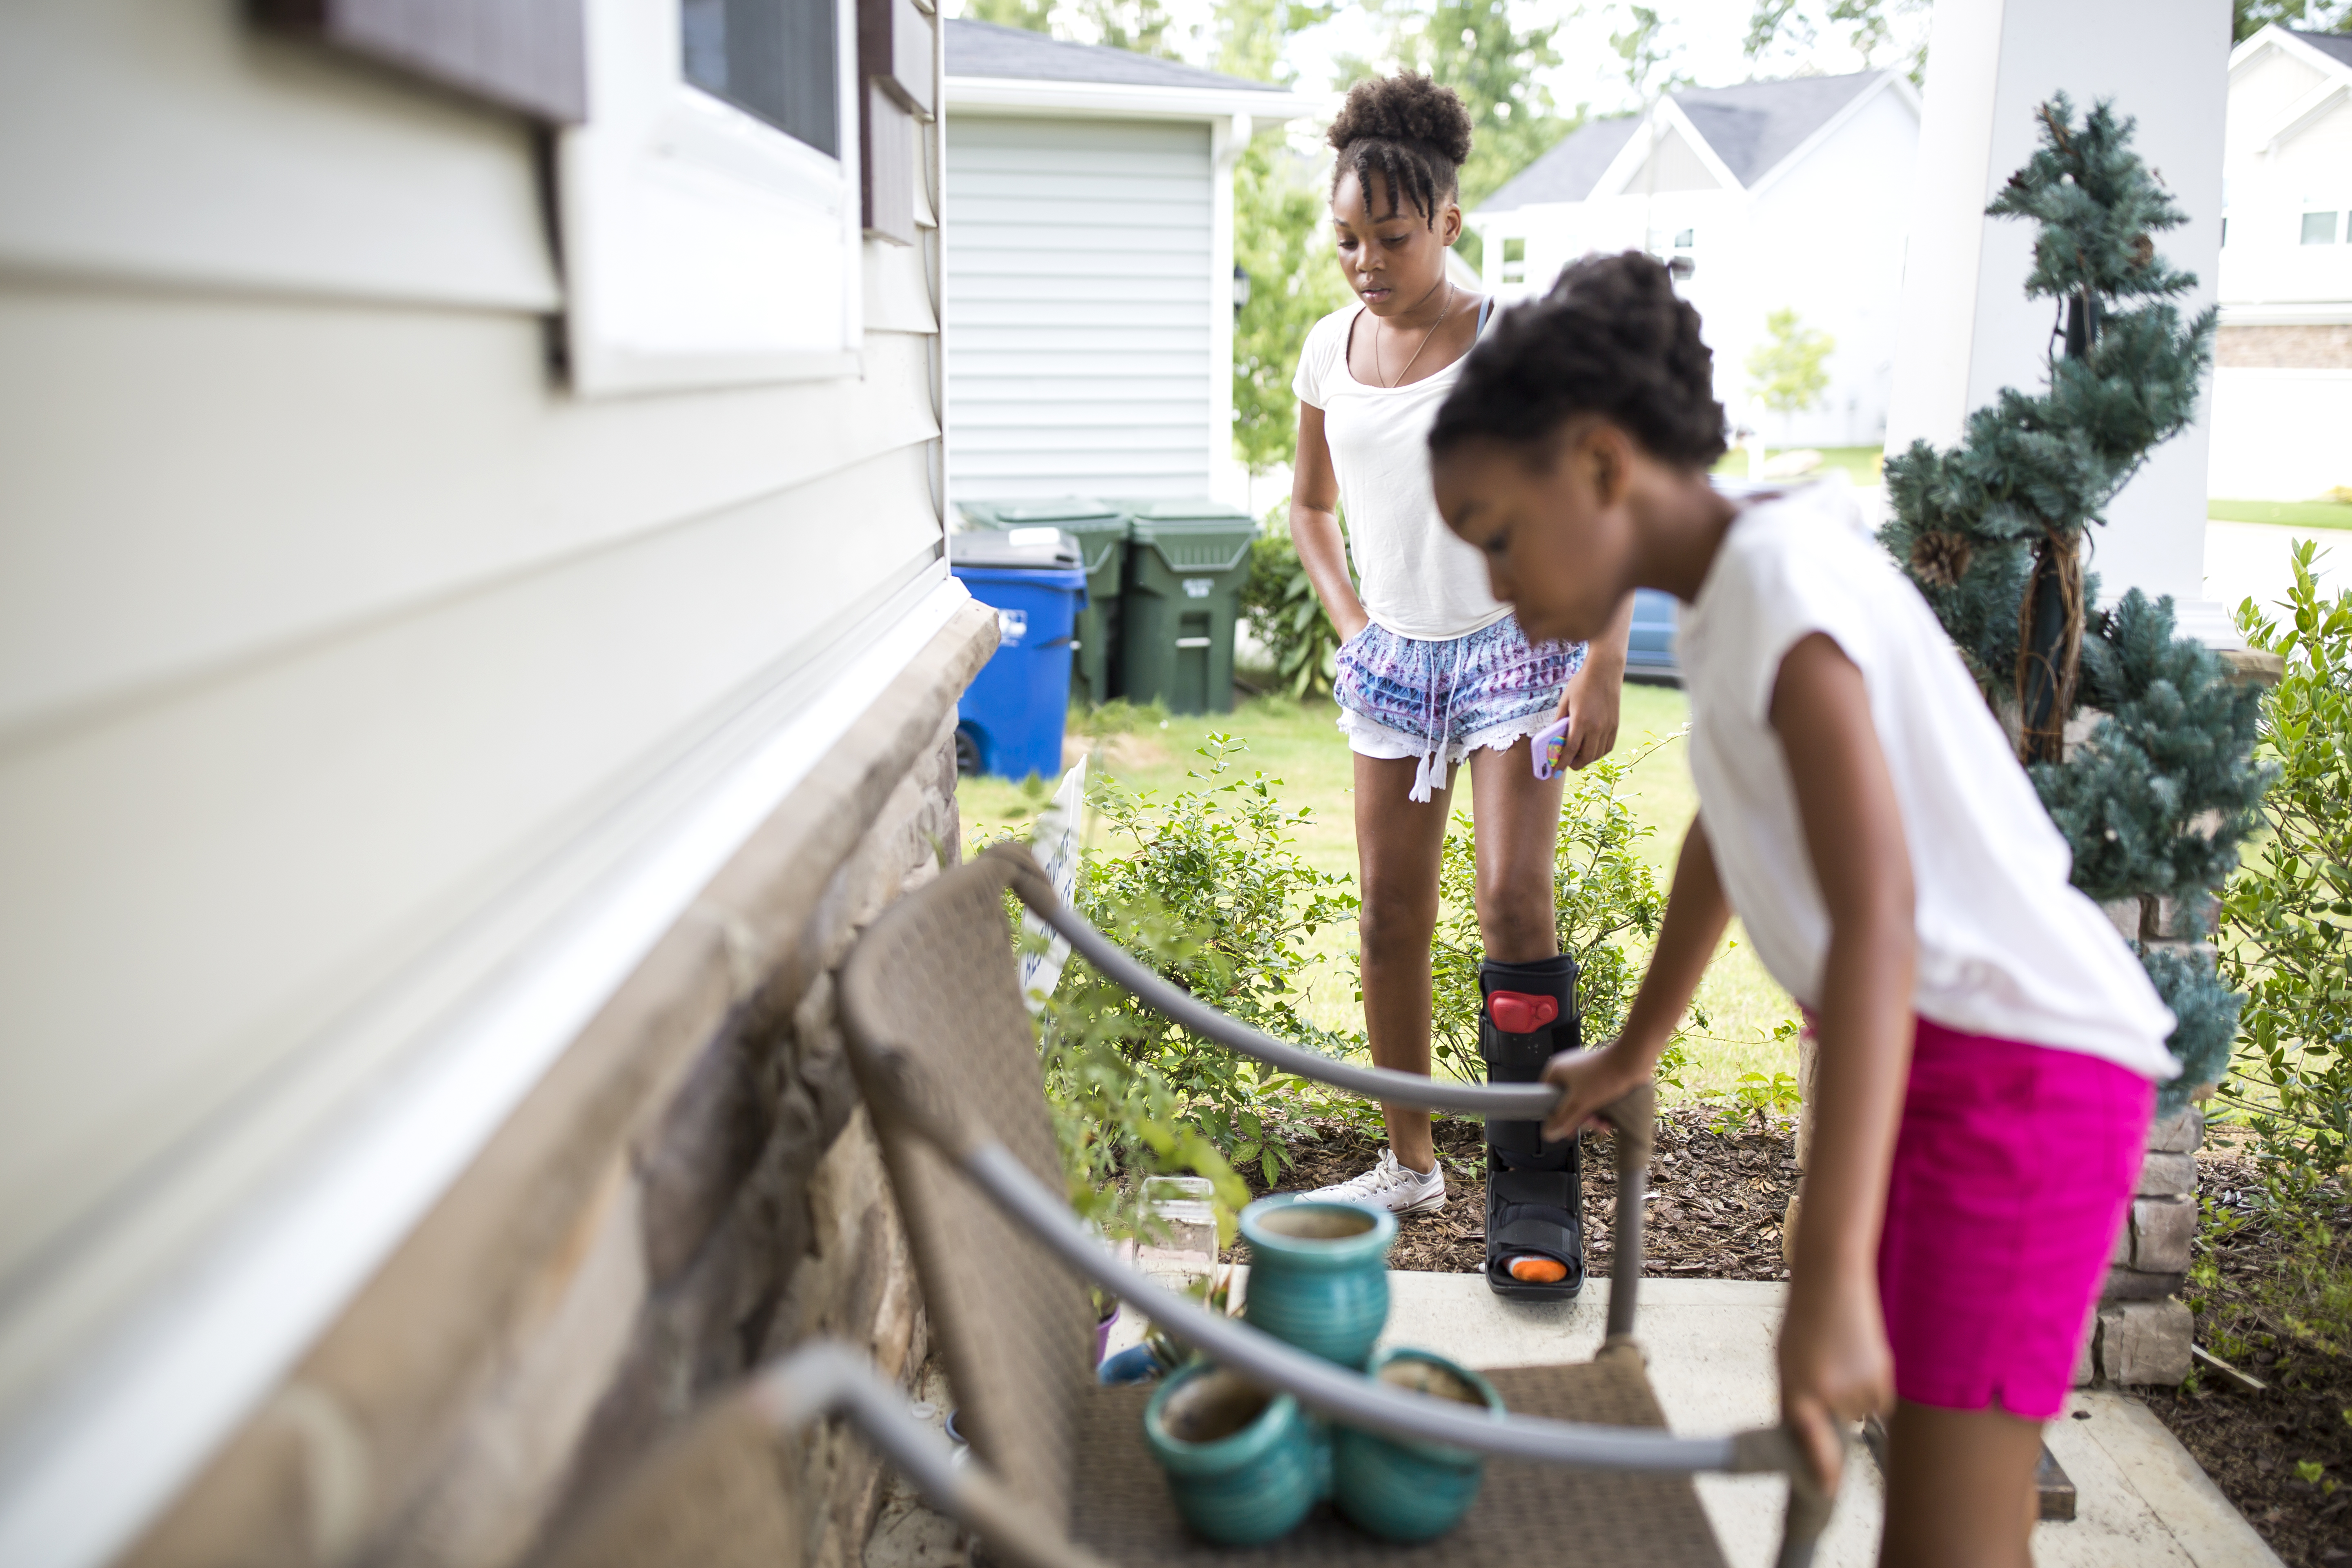 Kaiden, left, and Karisma, right, inspect their small garden at home during summer break. They found tomato plants in the woods behind their house and bought some spinach and flower seeds from Walmart. Kaiden feels that “the garden is a little homely and needs some maintenance.”